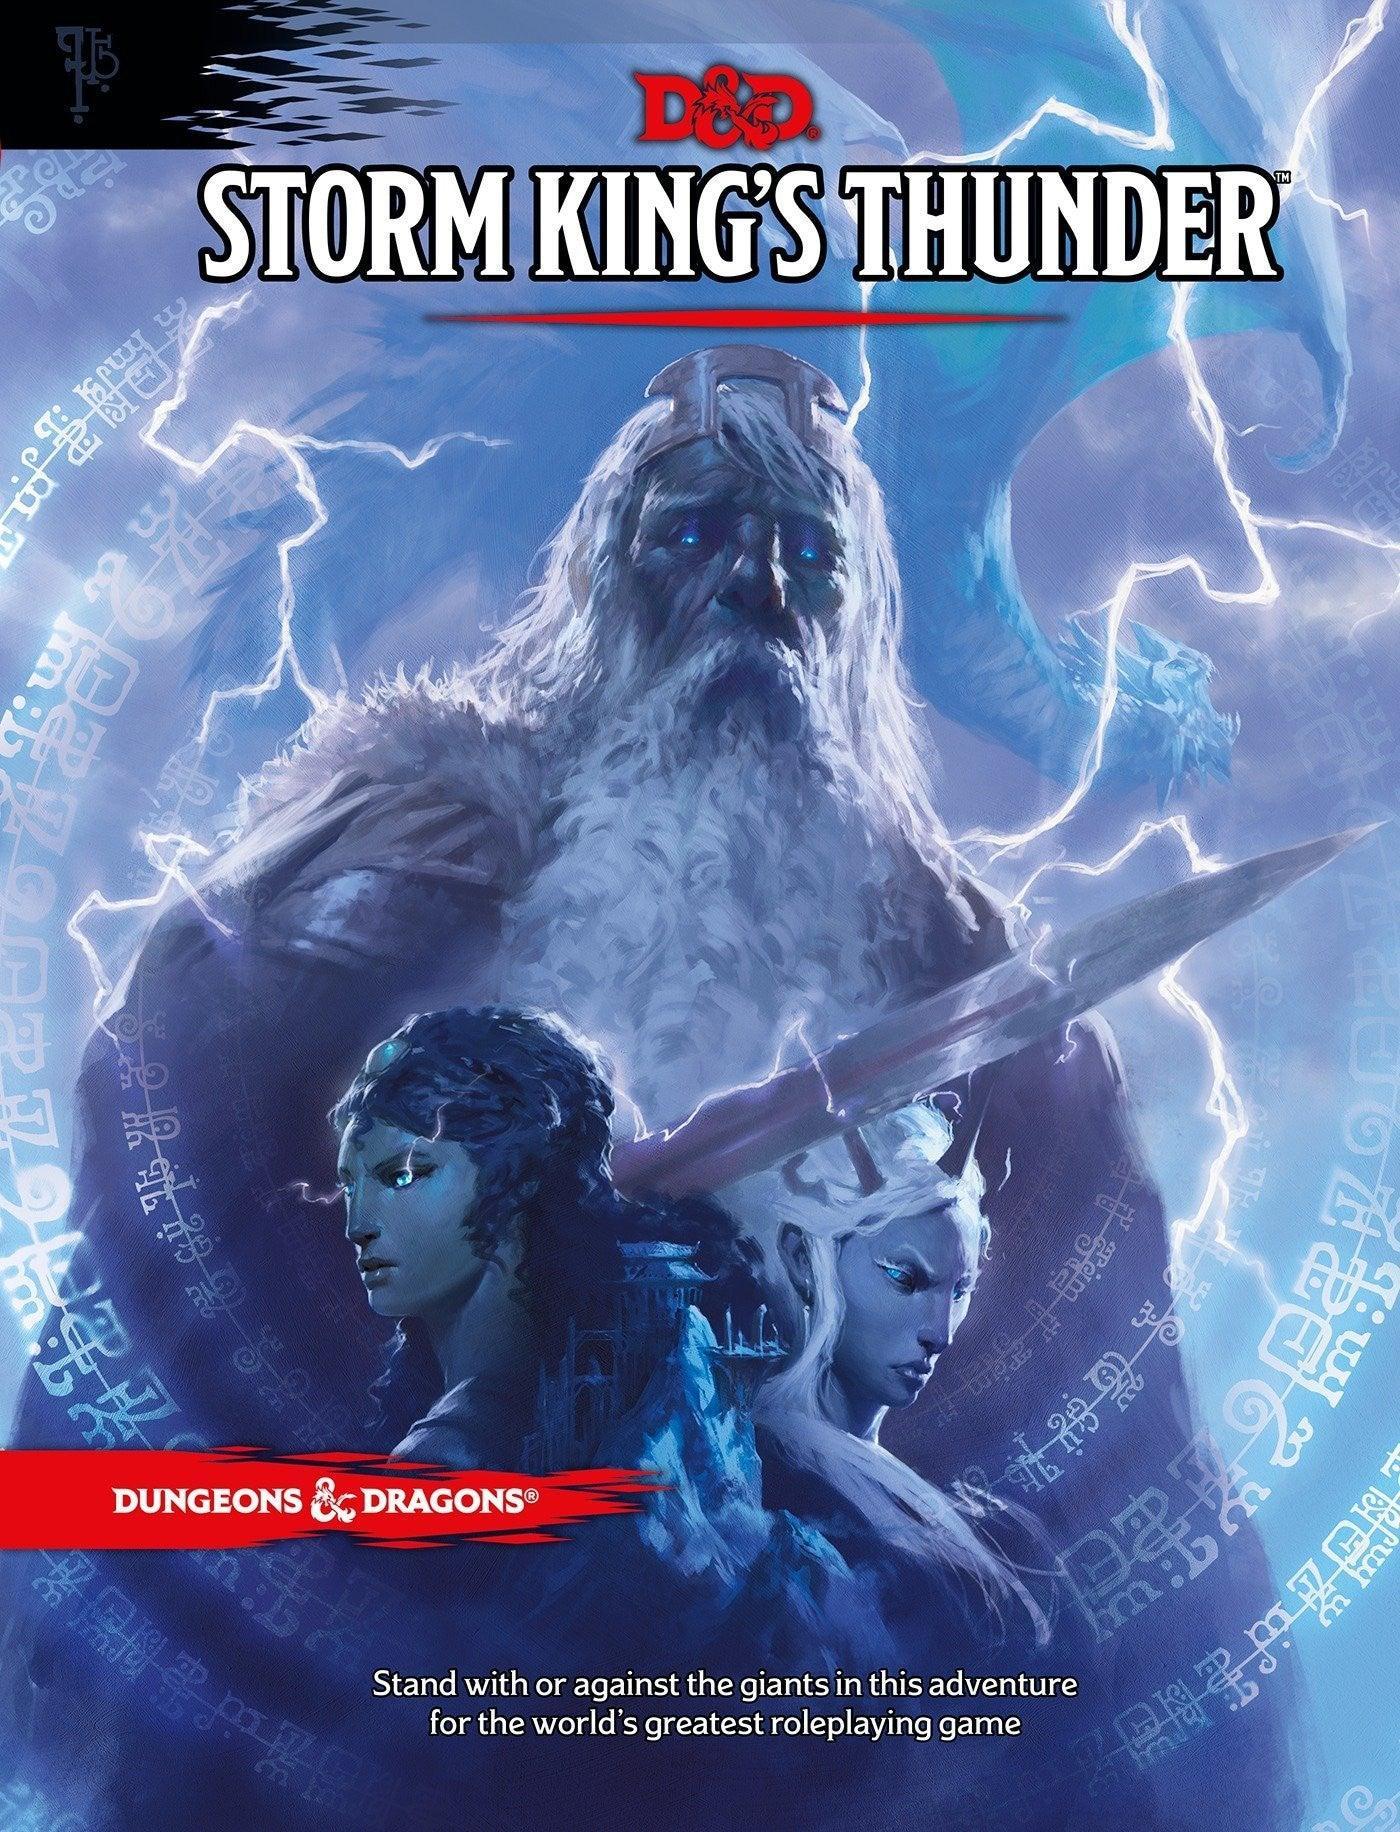 VR-87490 D&D Dungeons & Dragons Storm Kings Thunder Hardcover - Wizards of the Coast - Titan Pop Culture